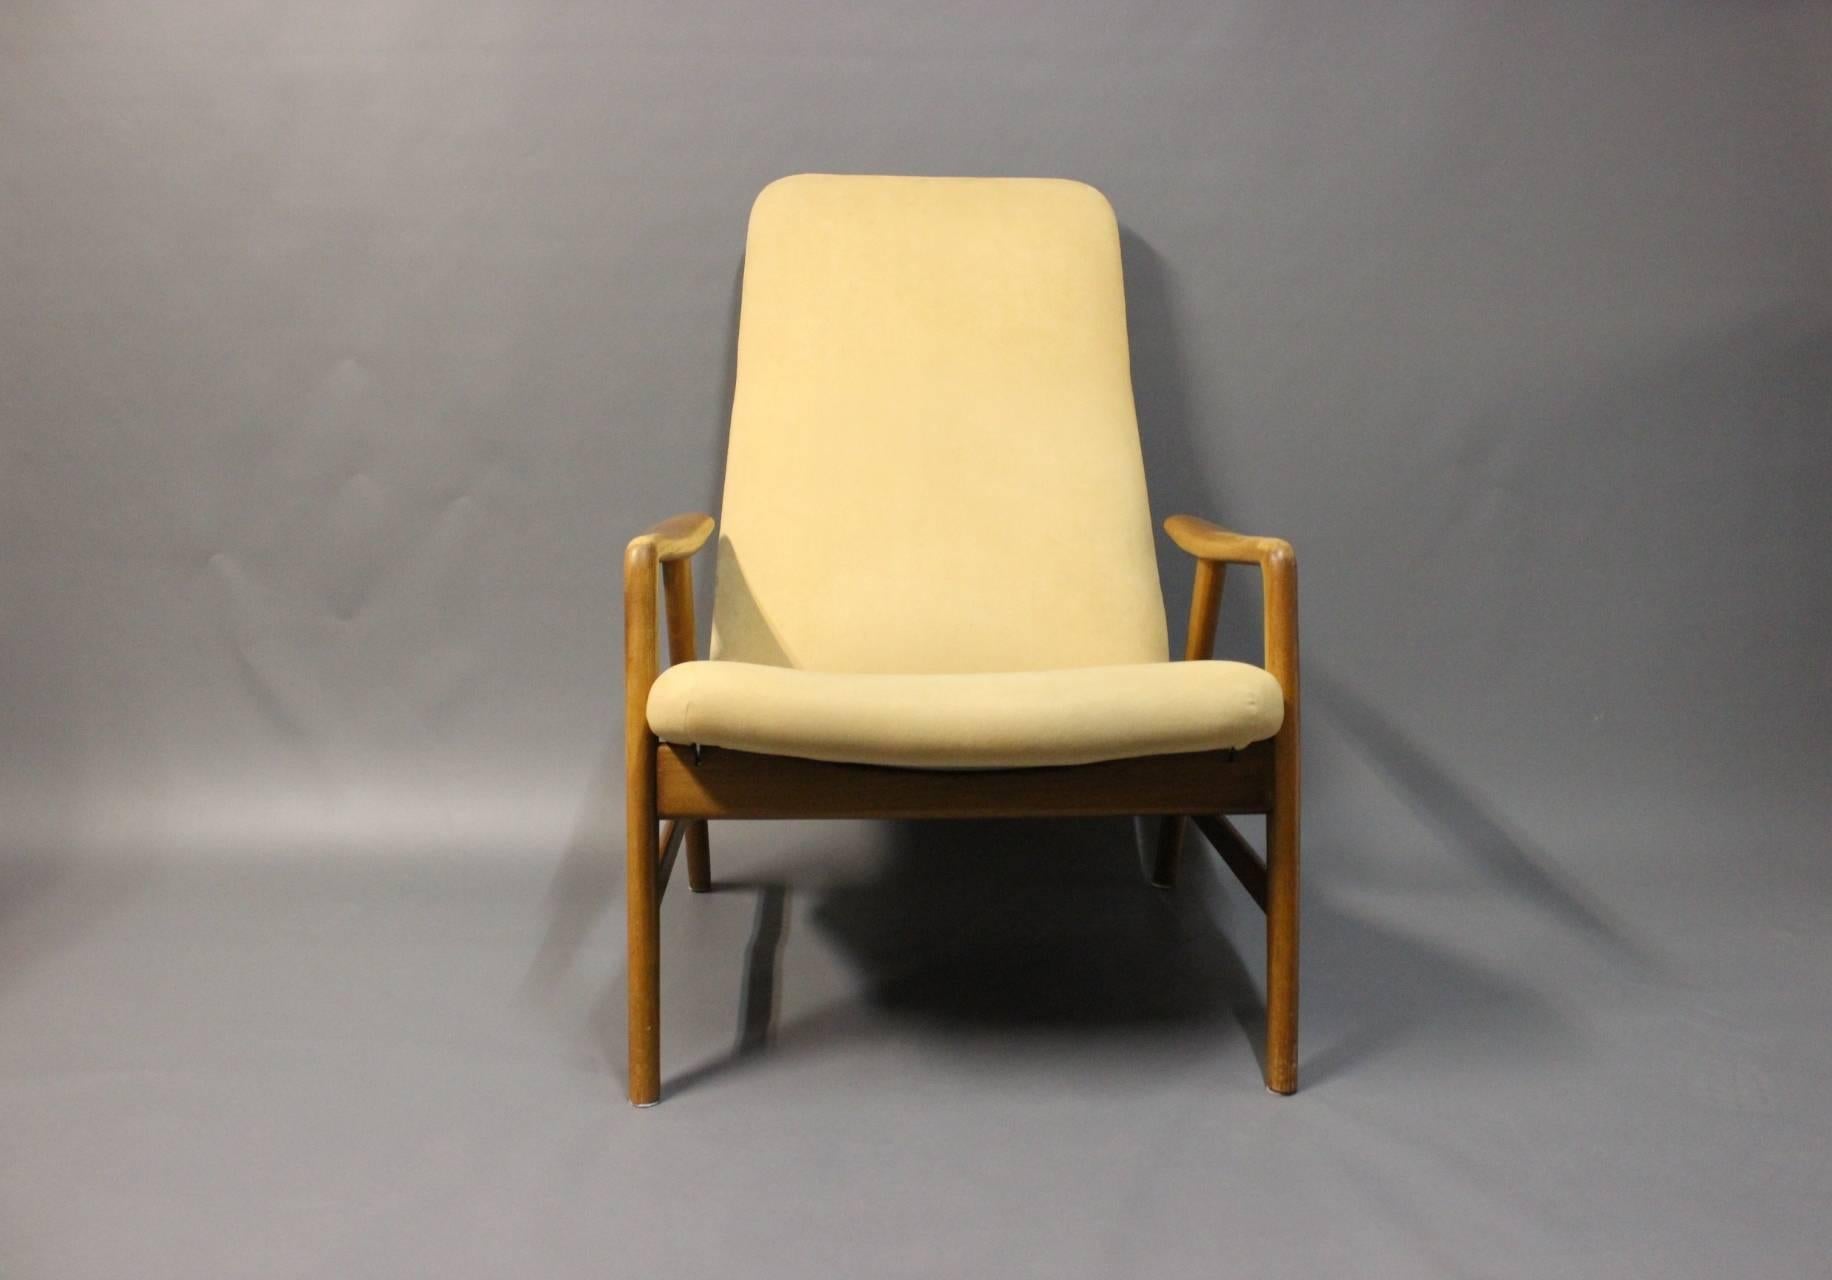 Highback reclining lounge chair designed by Alf Svensson and manufactured by Fritz Hansen. The chair is in elm and upholstered with alcantara (suede).